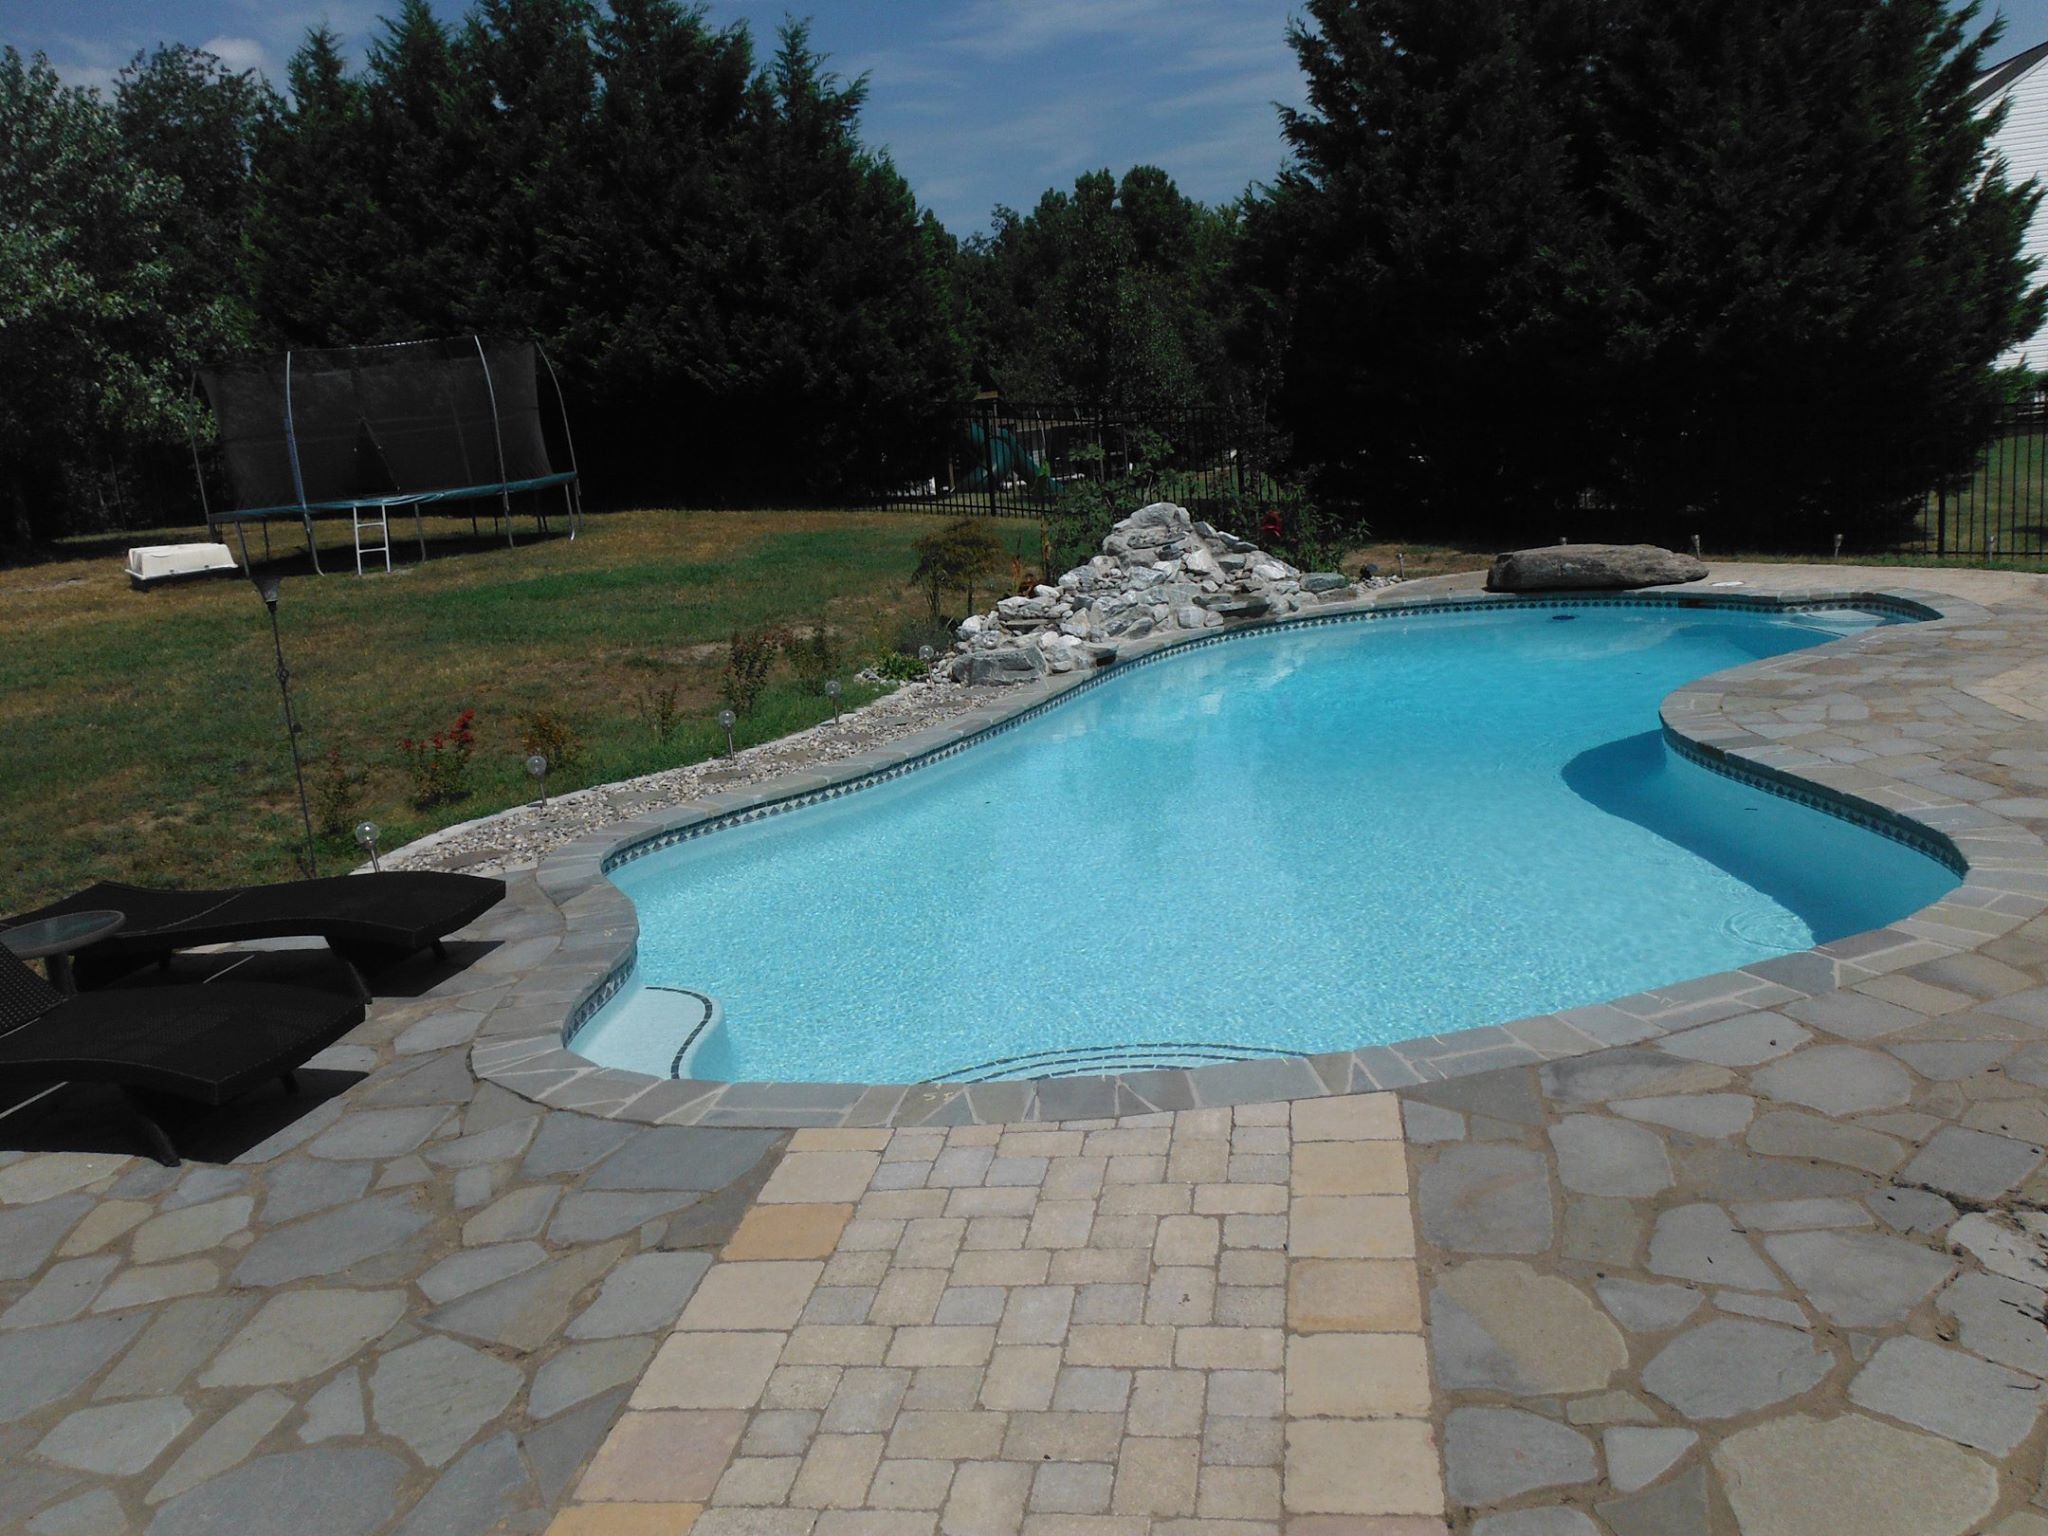 If you’ve ever wanted to have the fun and relaxation of a day at the pool without the hassle of packing up the car and dealing with the crowds, Leisure Contracting, LLC is the place for you! The fiberglass pool installation experts at Leisure Contracting have over 20 years of expertise in the industry – simply put, no one knows backyard pools better than they do! One of the hallmarks of their success is their timeliness and their dedication to customer service at every step of the pool installation process. changing your pool area from a watery hole in the ground to a true backyard oasis! Contact Leisure Contracting, LLC today for free estimates! 4102422264 support@leisurecontracting.com http://www.leisurecontracting.com/